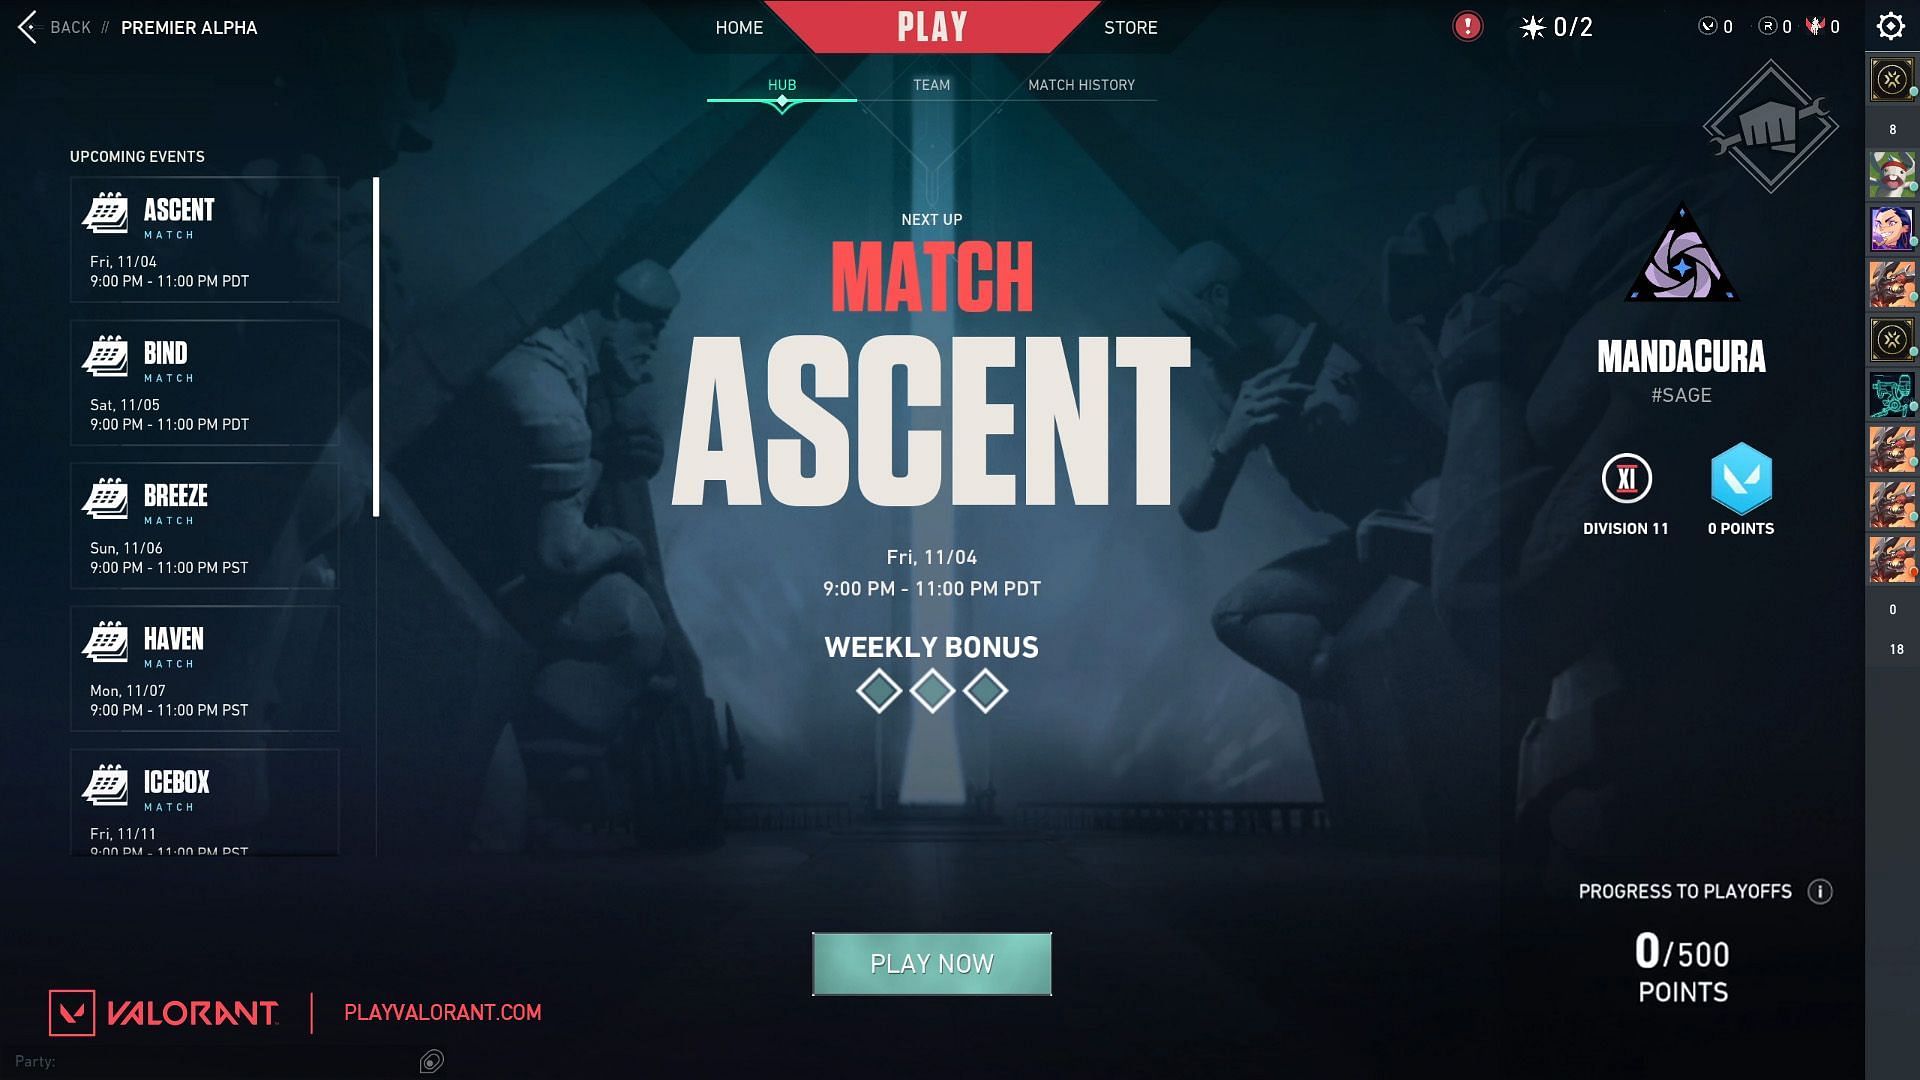 A new game mode will be seen in Valorant (Image via Riot Games)